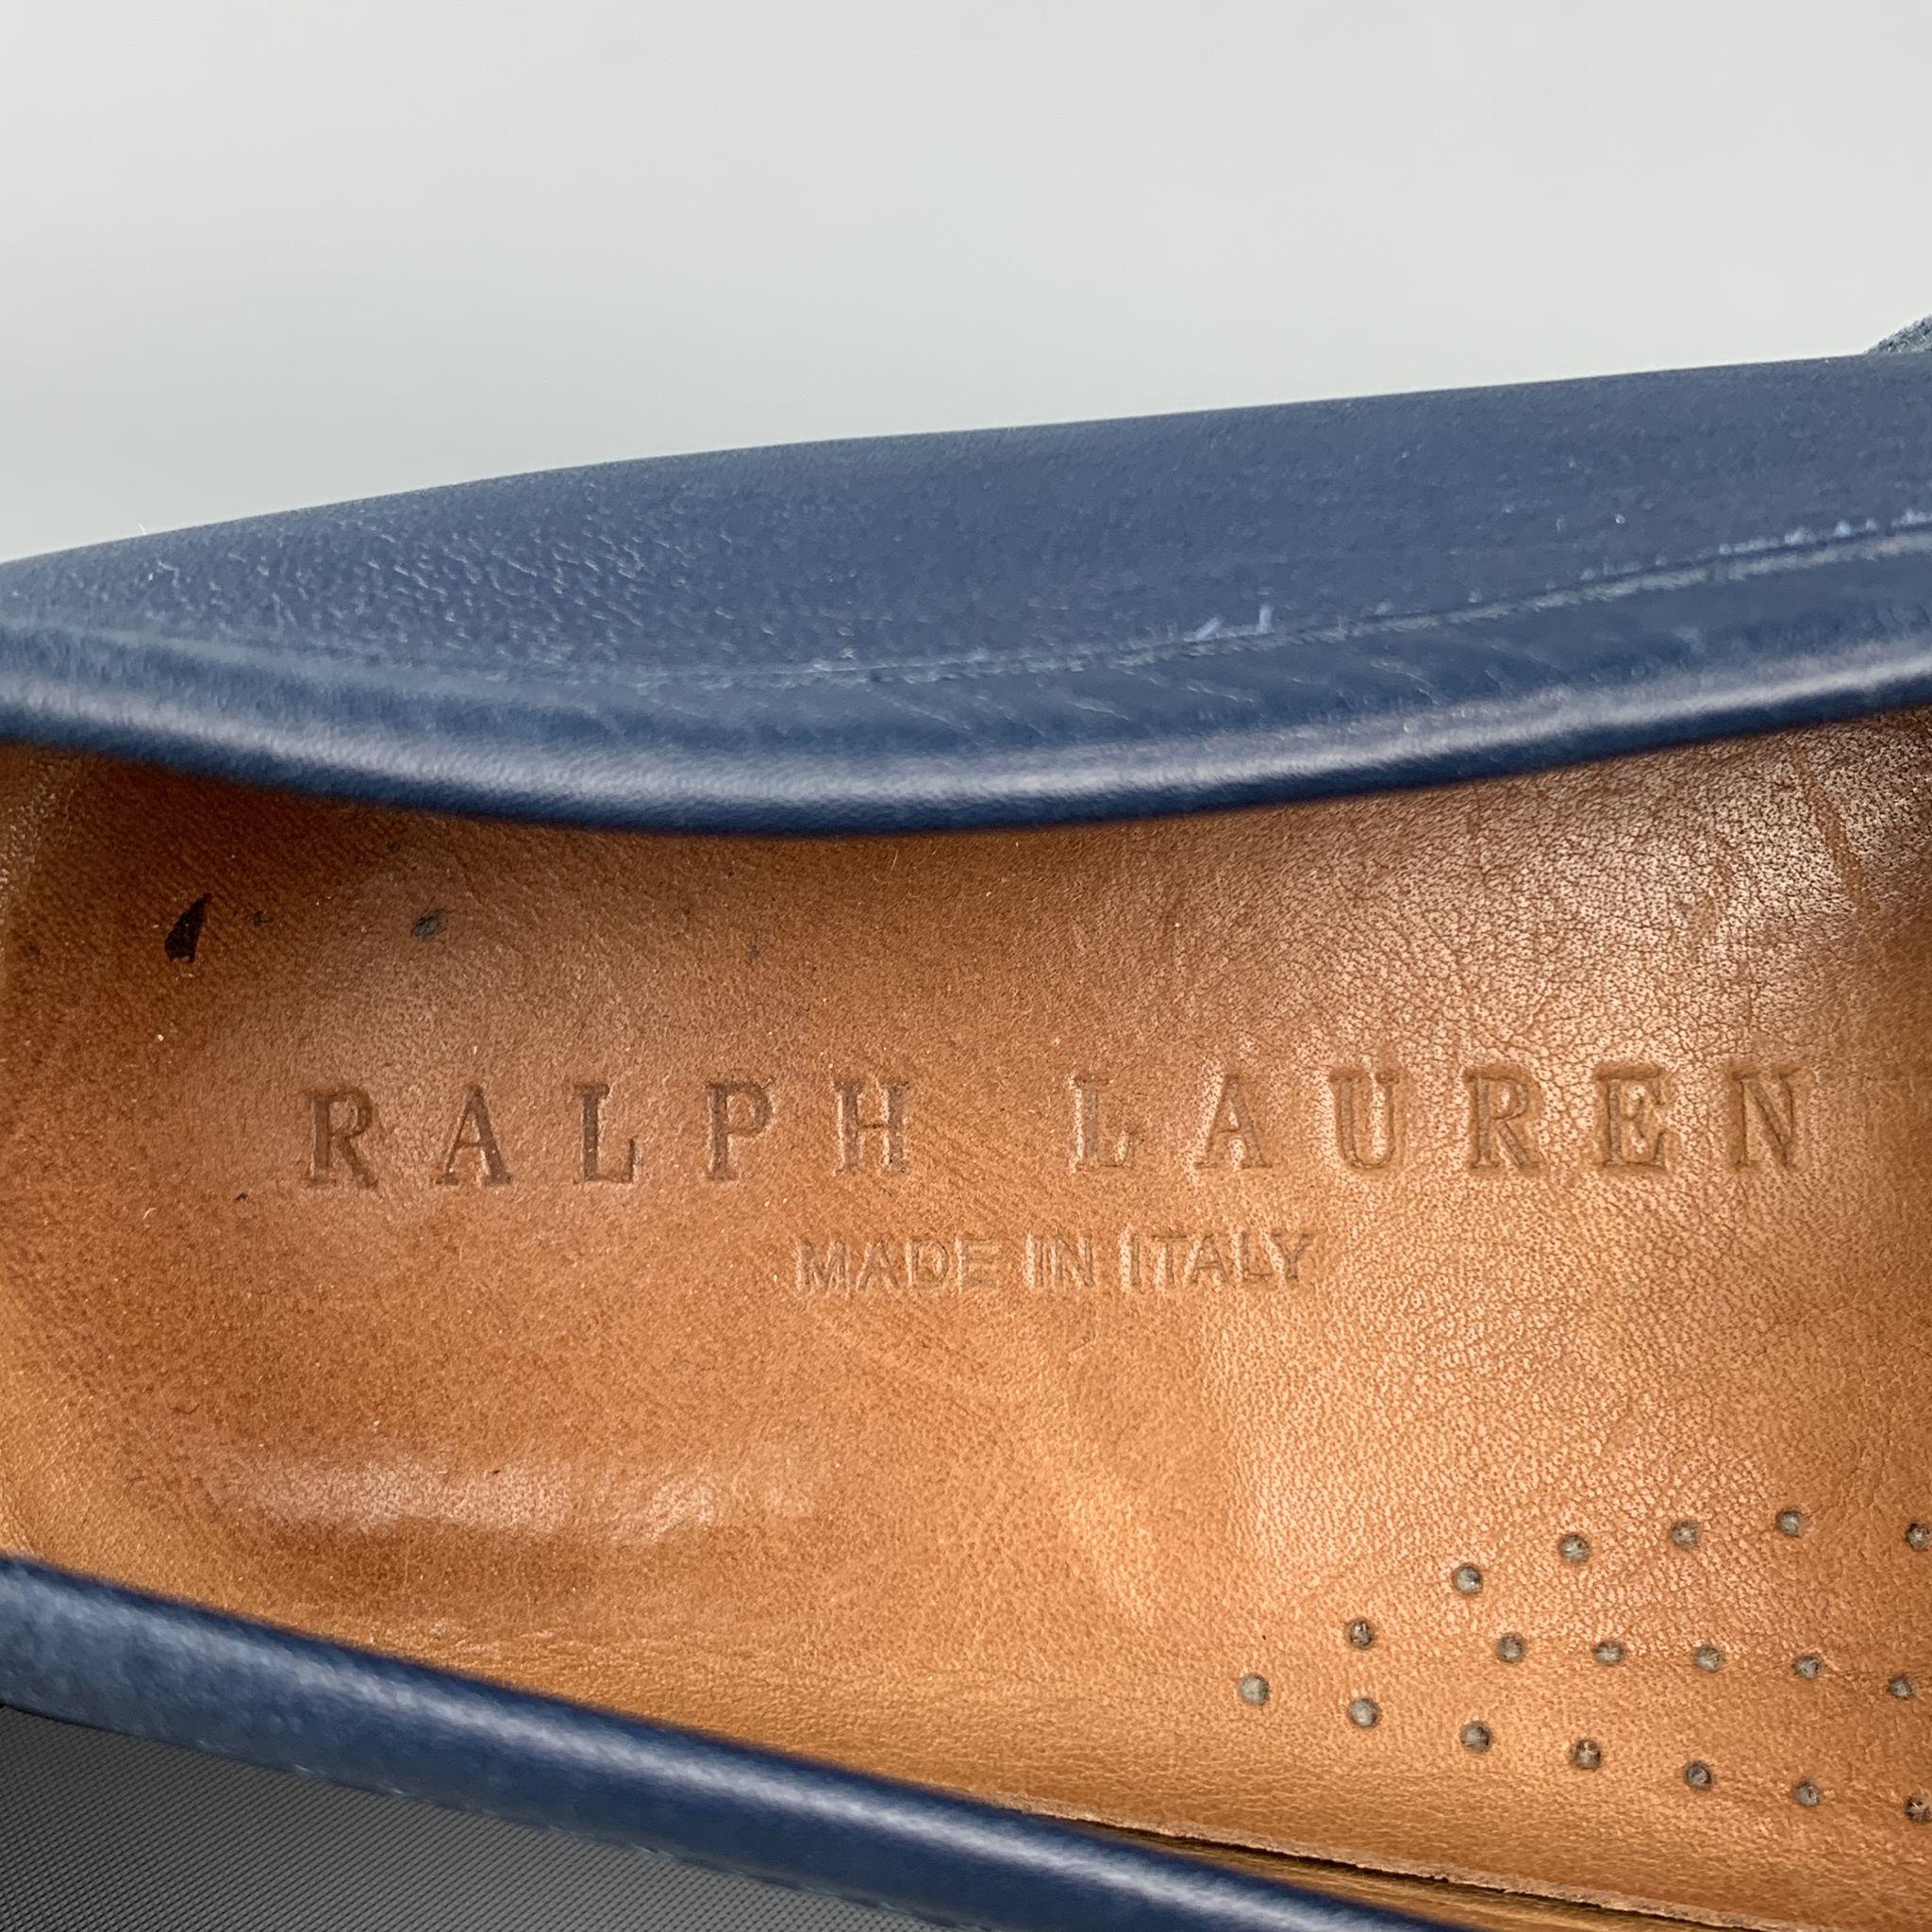 RALPH LAUREN Size 7.5 Navy Solid Leather Drivers Loafers 1